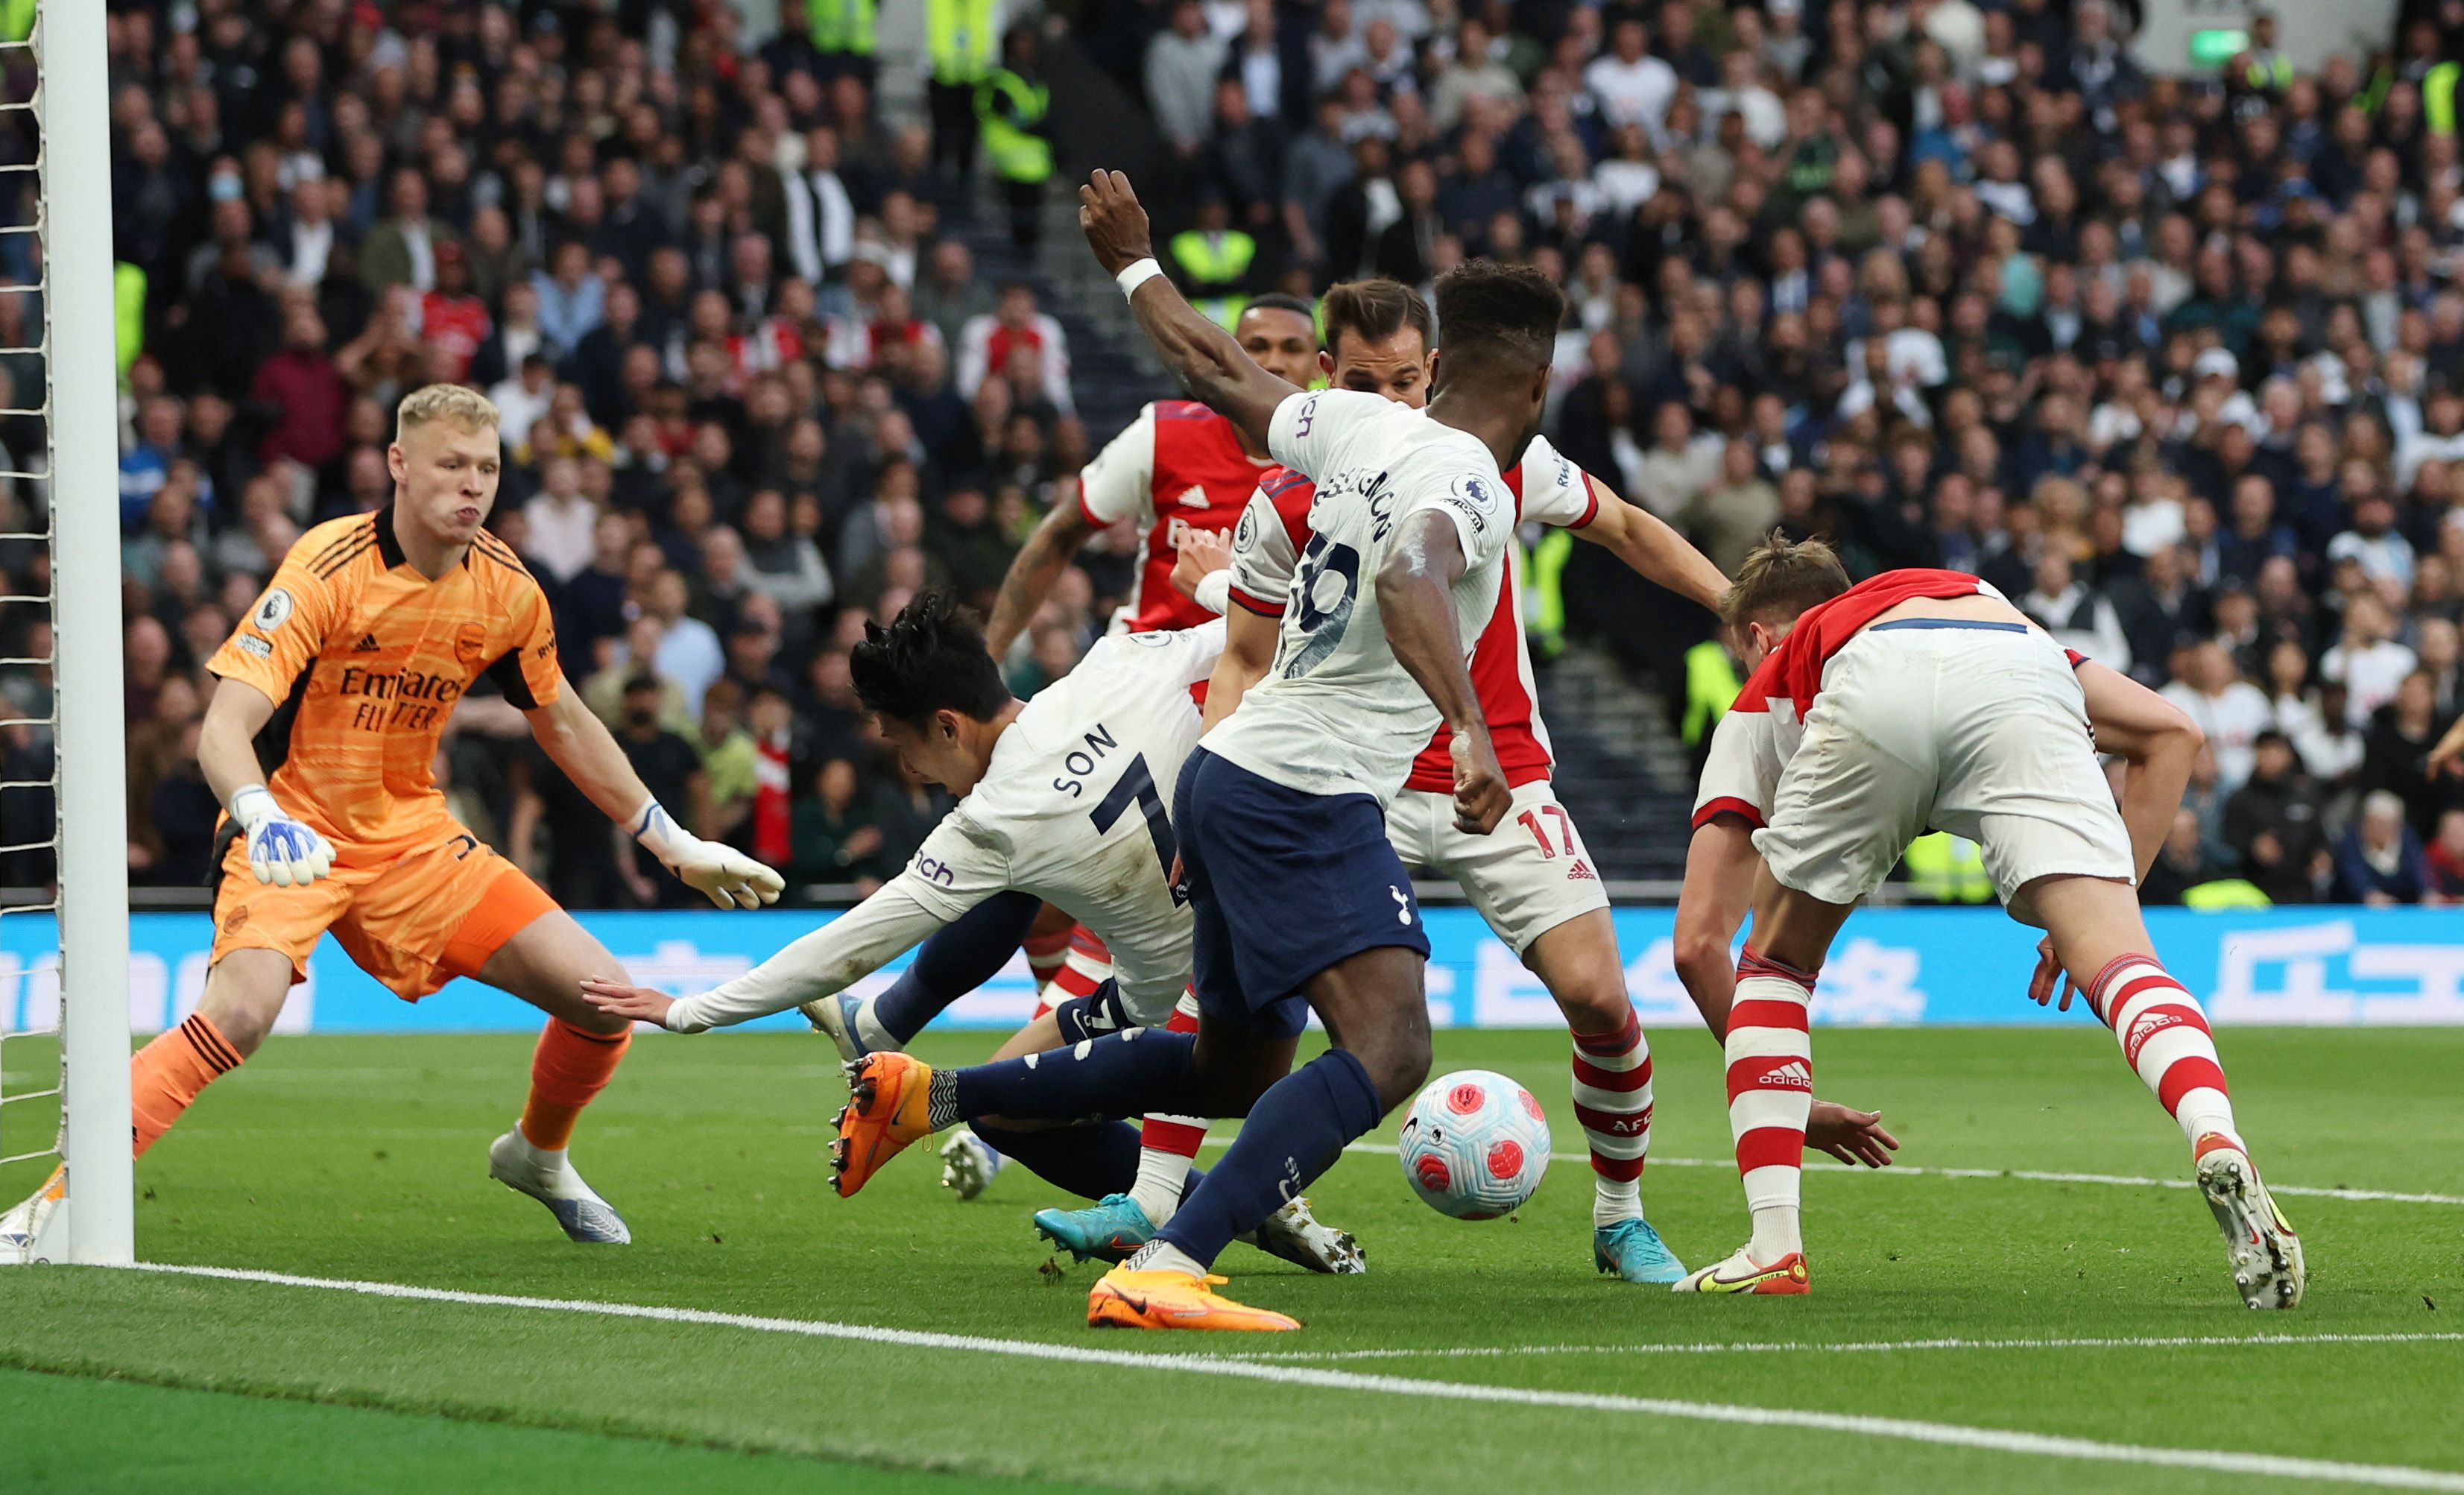 Arsenal's Soares concedes a penalty.